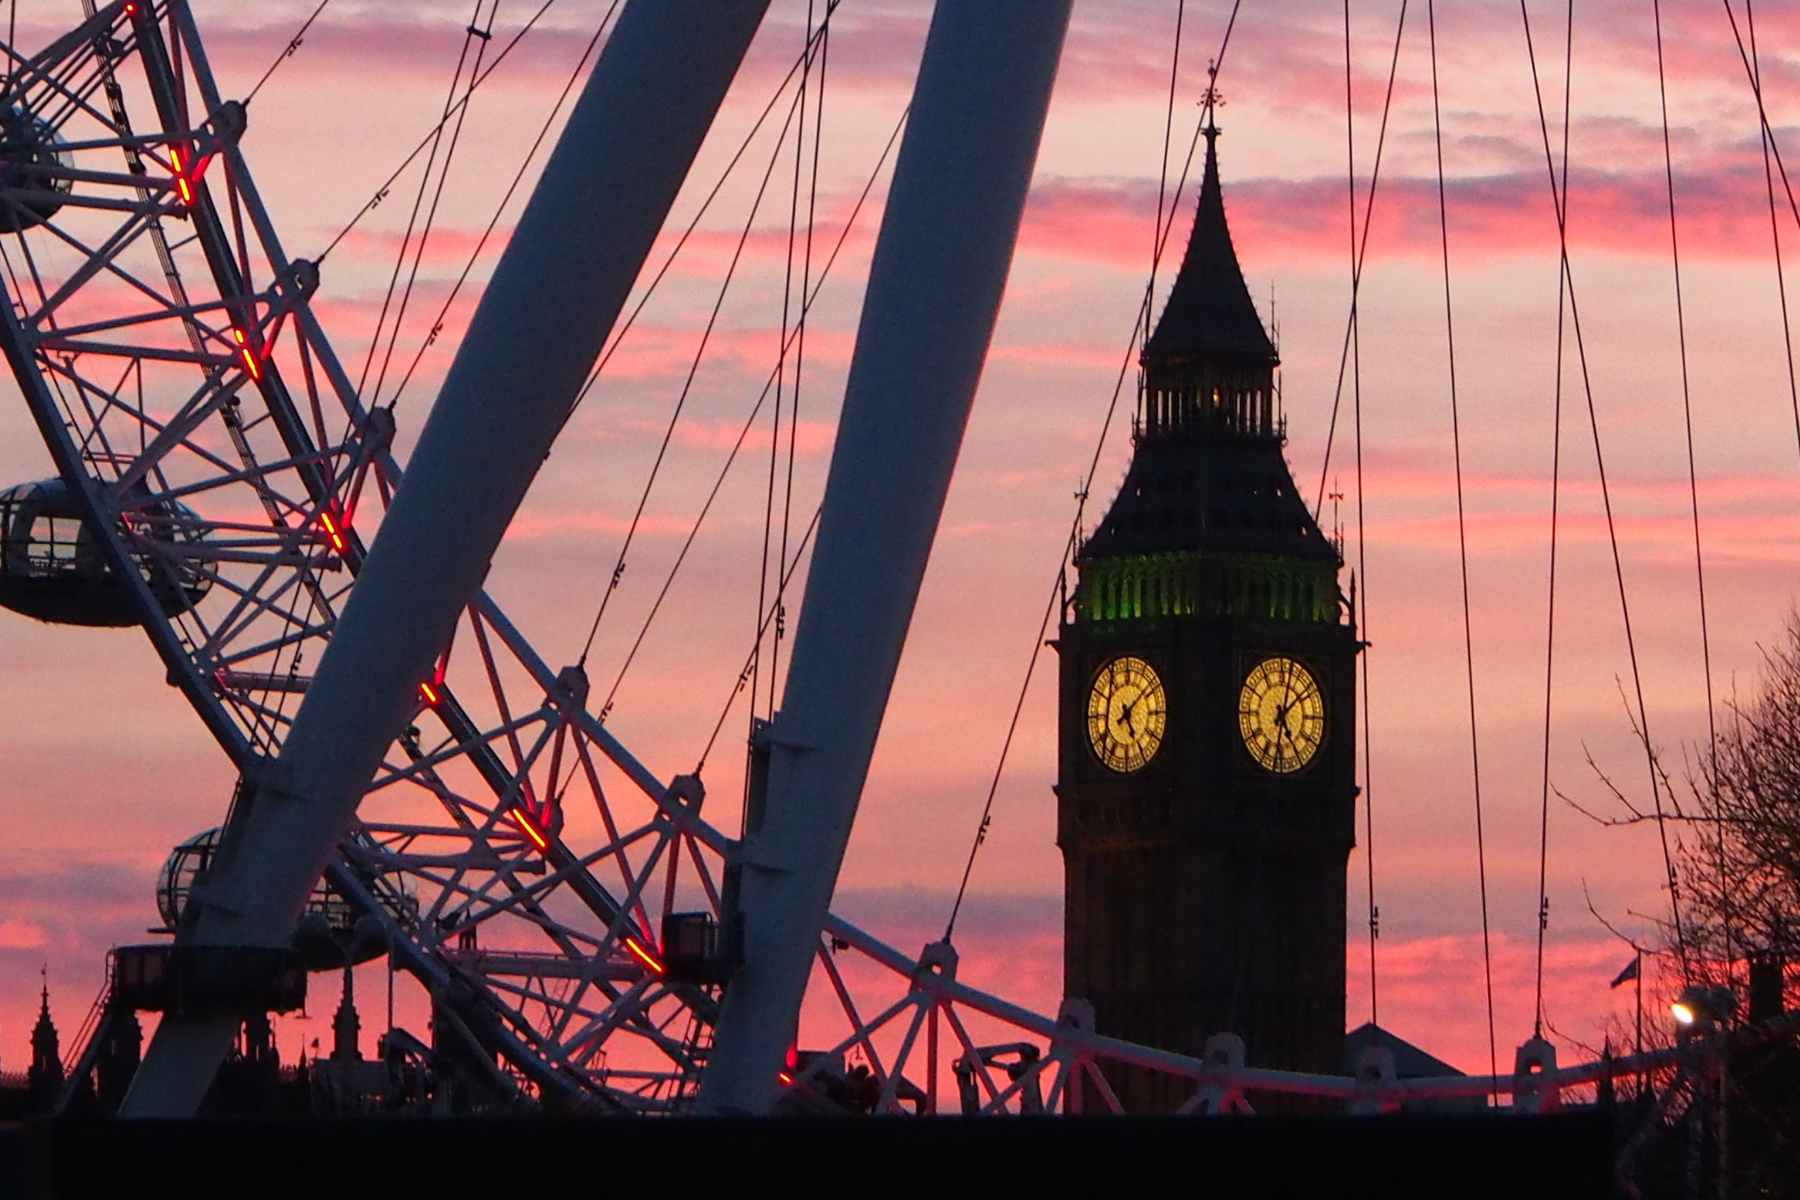 A view of Big Ben framed by the London Eye during a pink sunset.